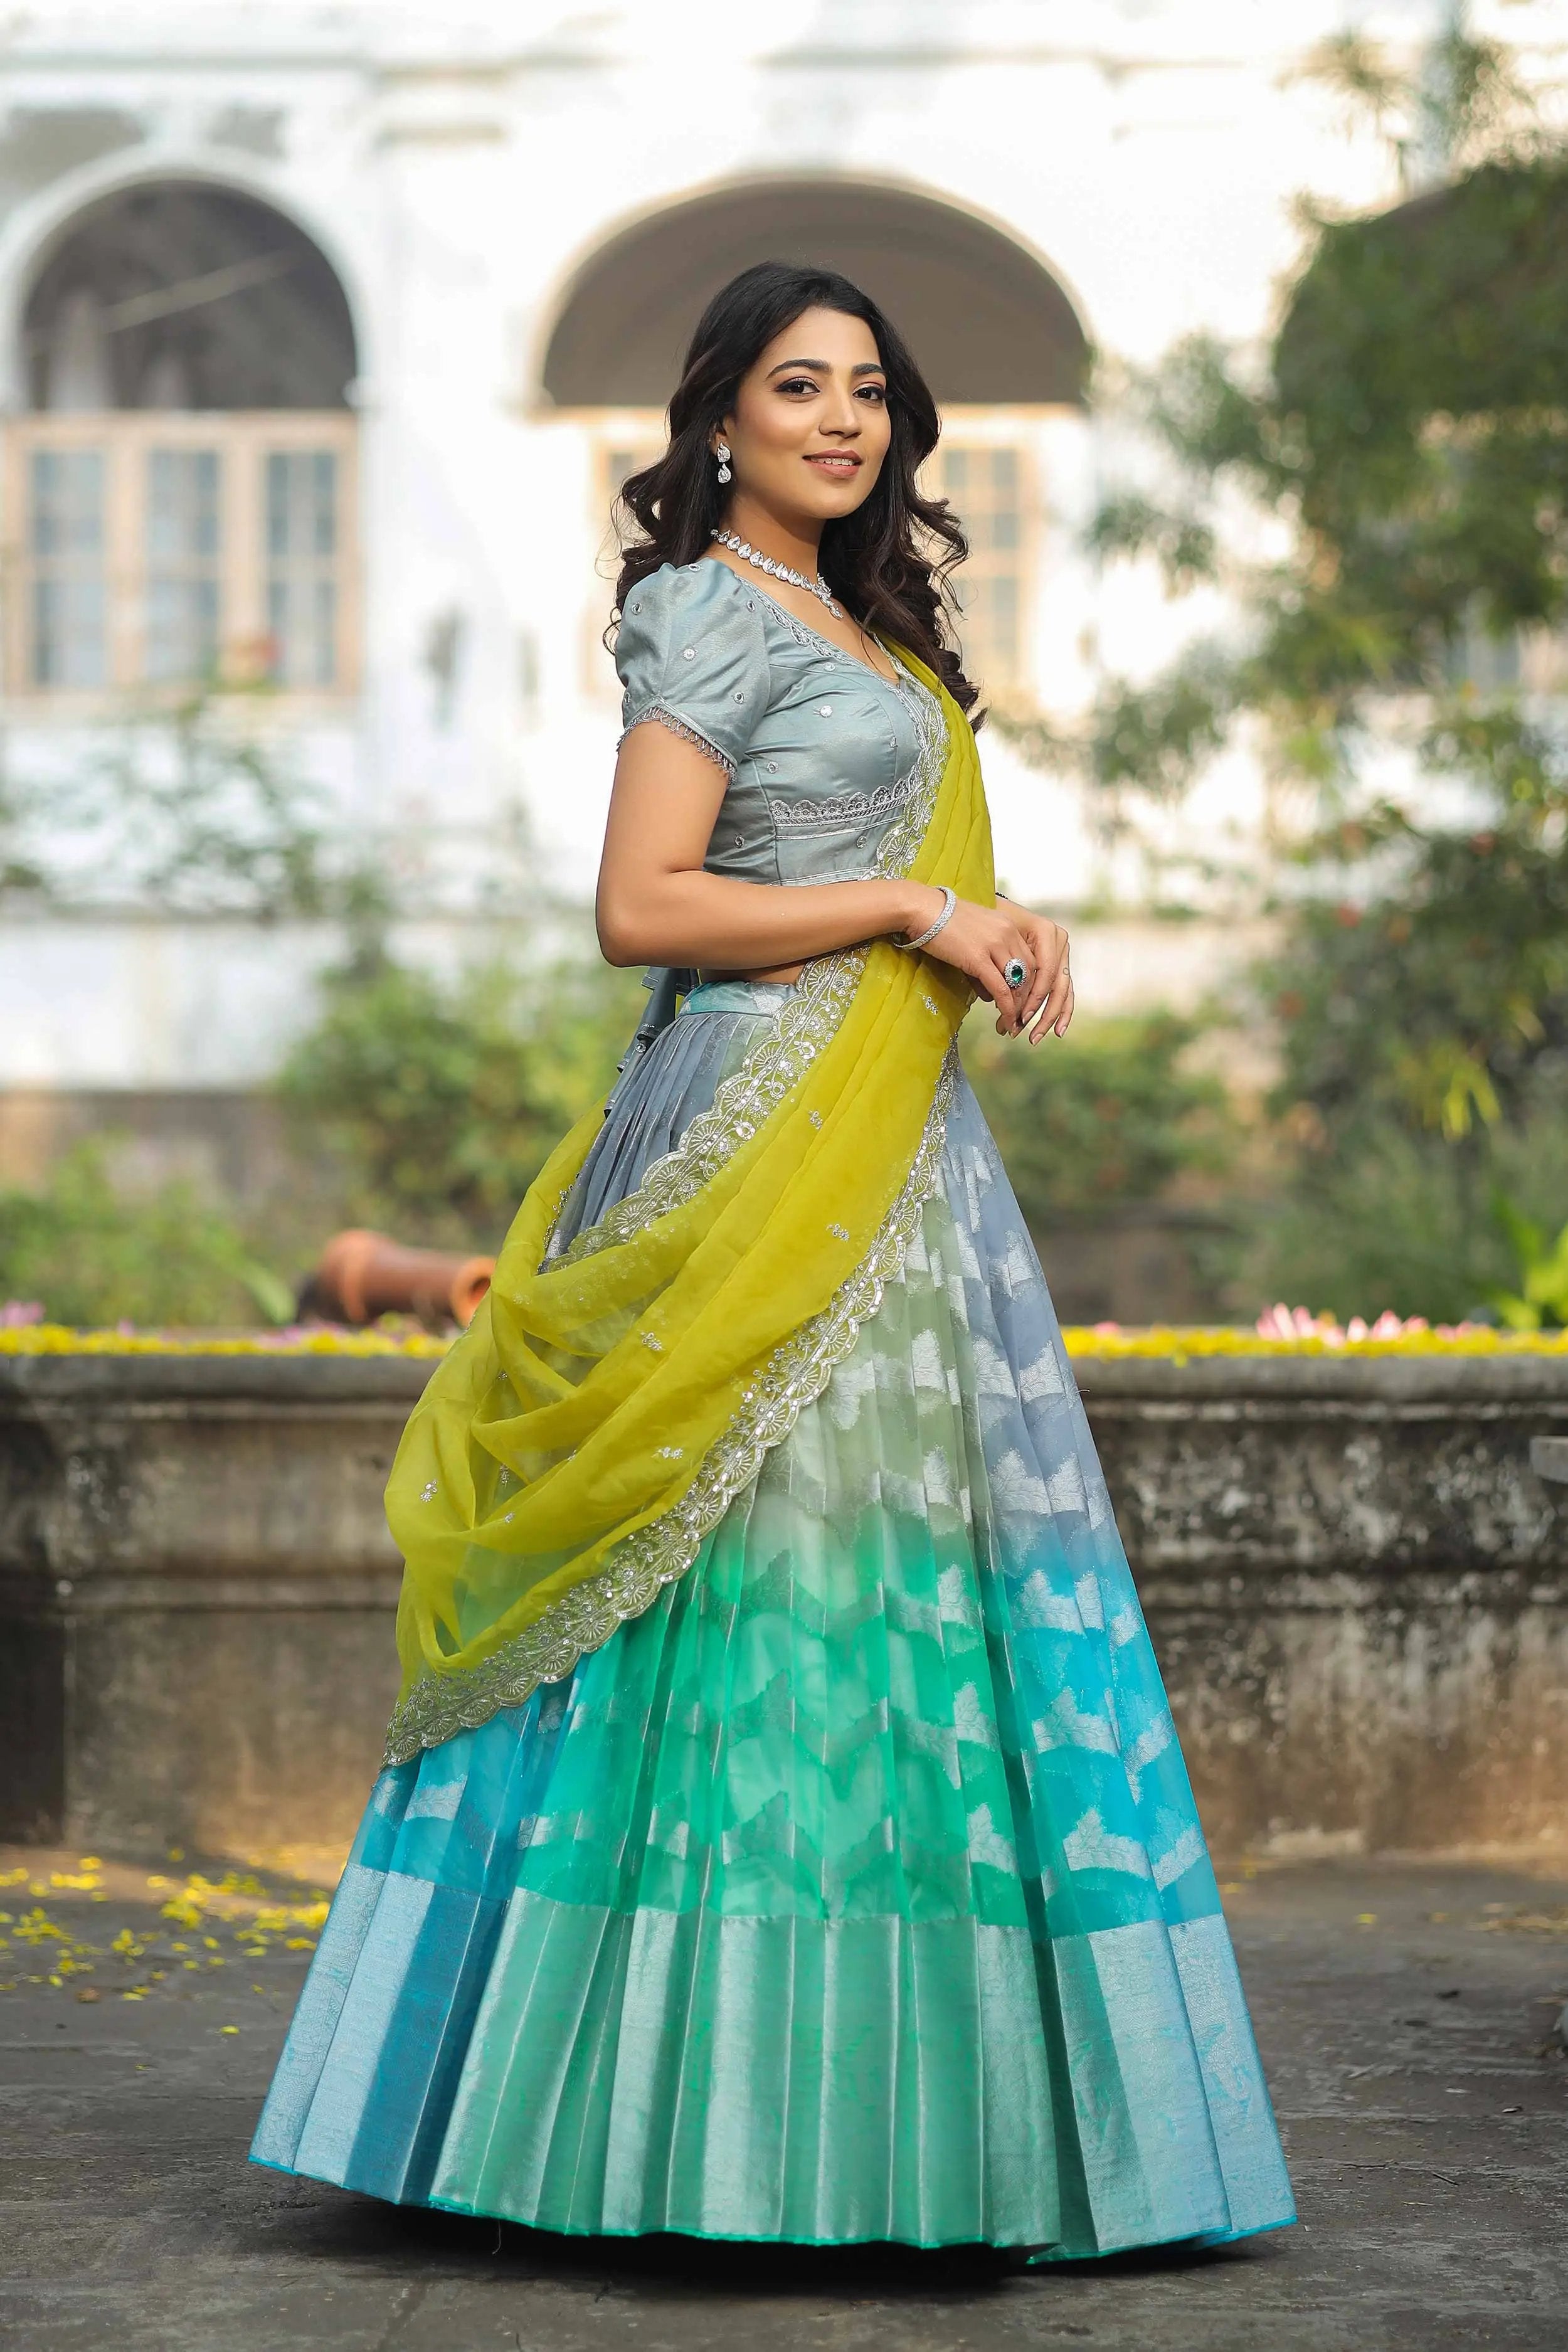 a woman in a green and blue lehenga dress